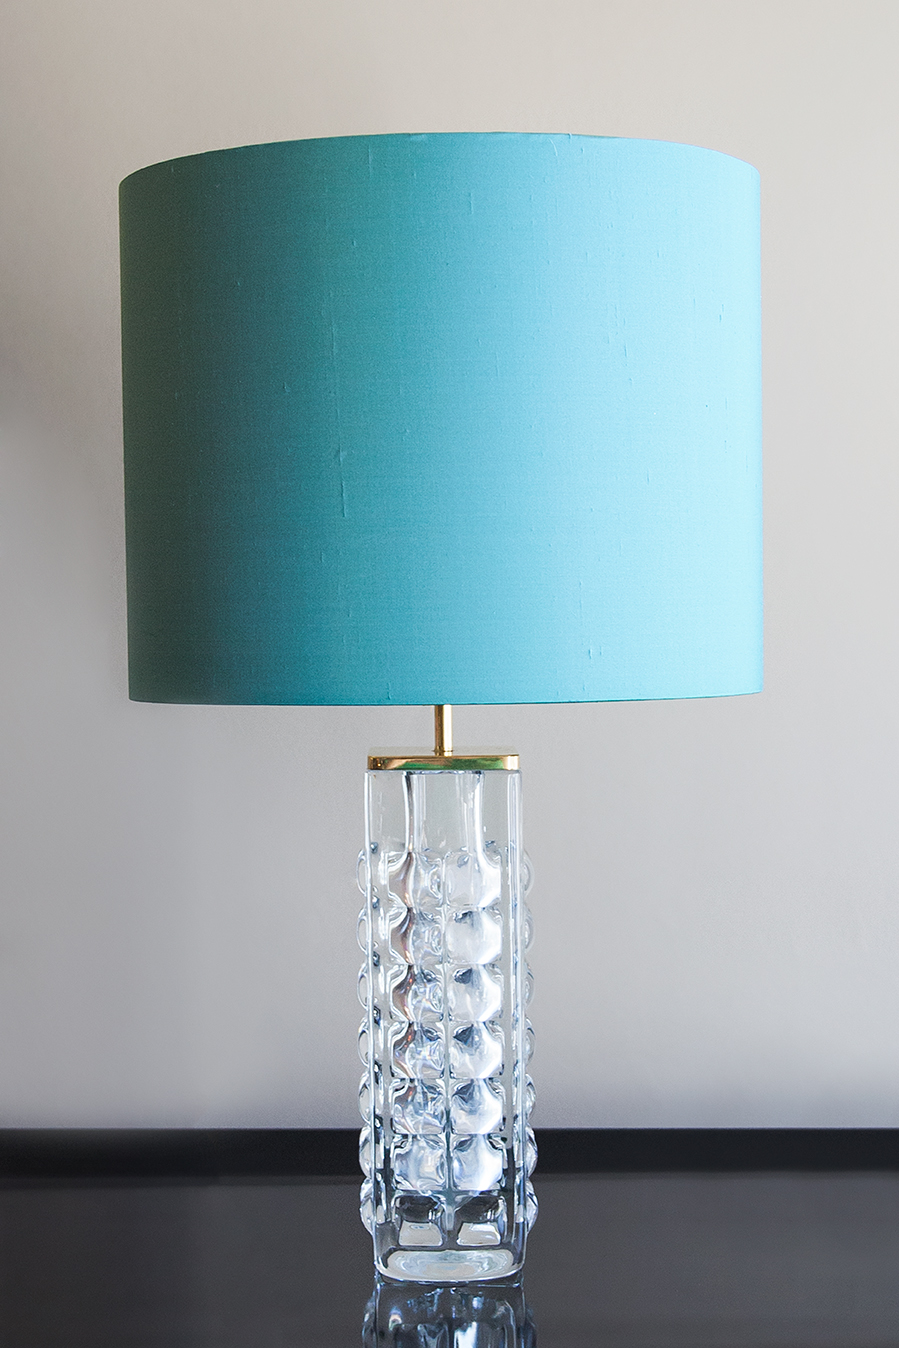 Table lamp by Orrefors